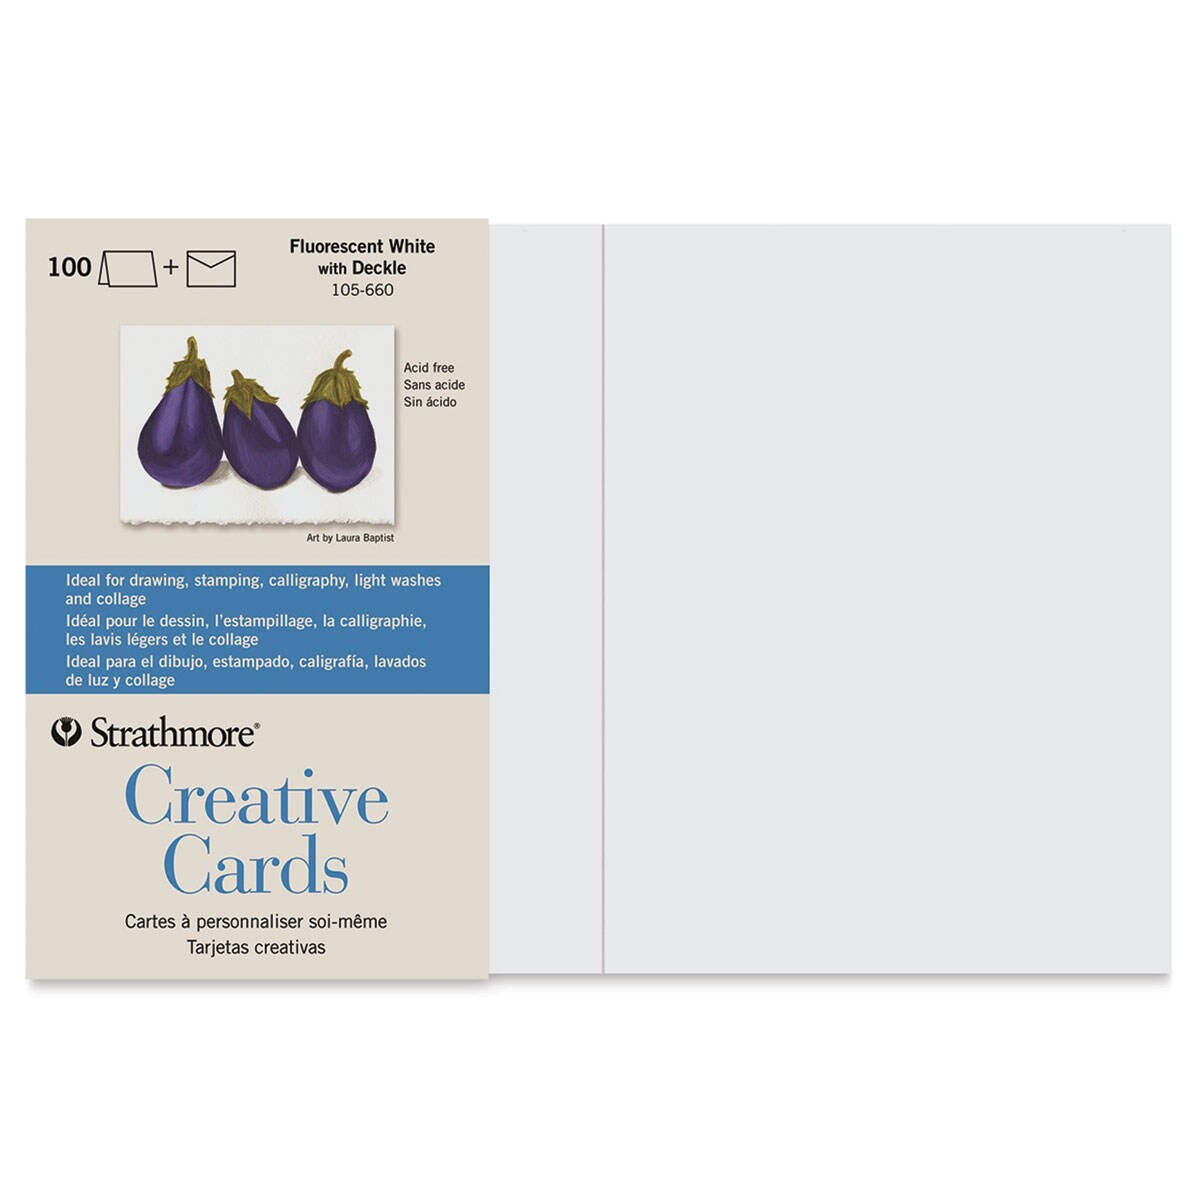 Strathmore Creative Cards and Envelopes - Full Size, Fluorescent White with Deckle, Pkg of 100